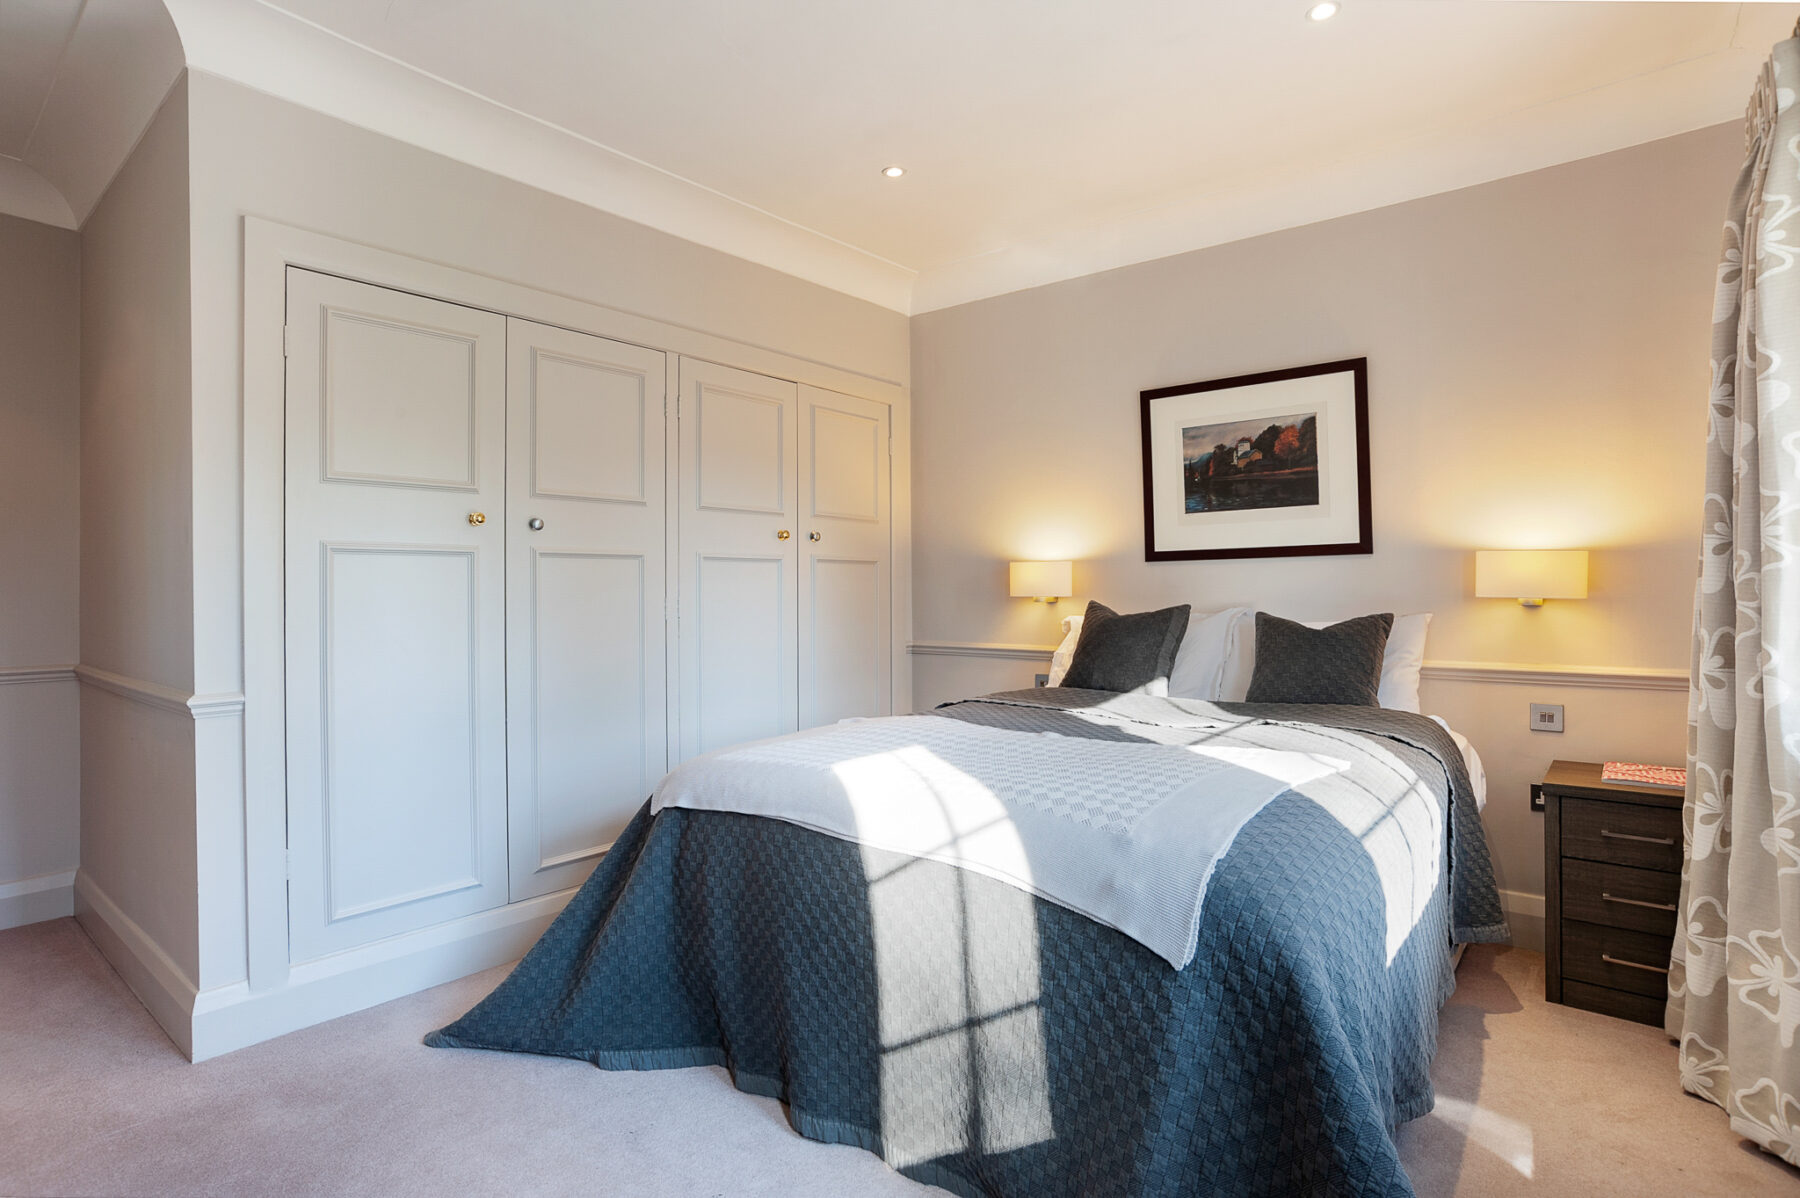 Bedroom double bed modern classic builtin wardrobe TV filming location hire lodge London 82